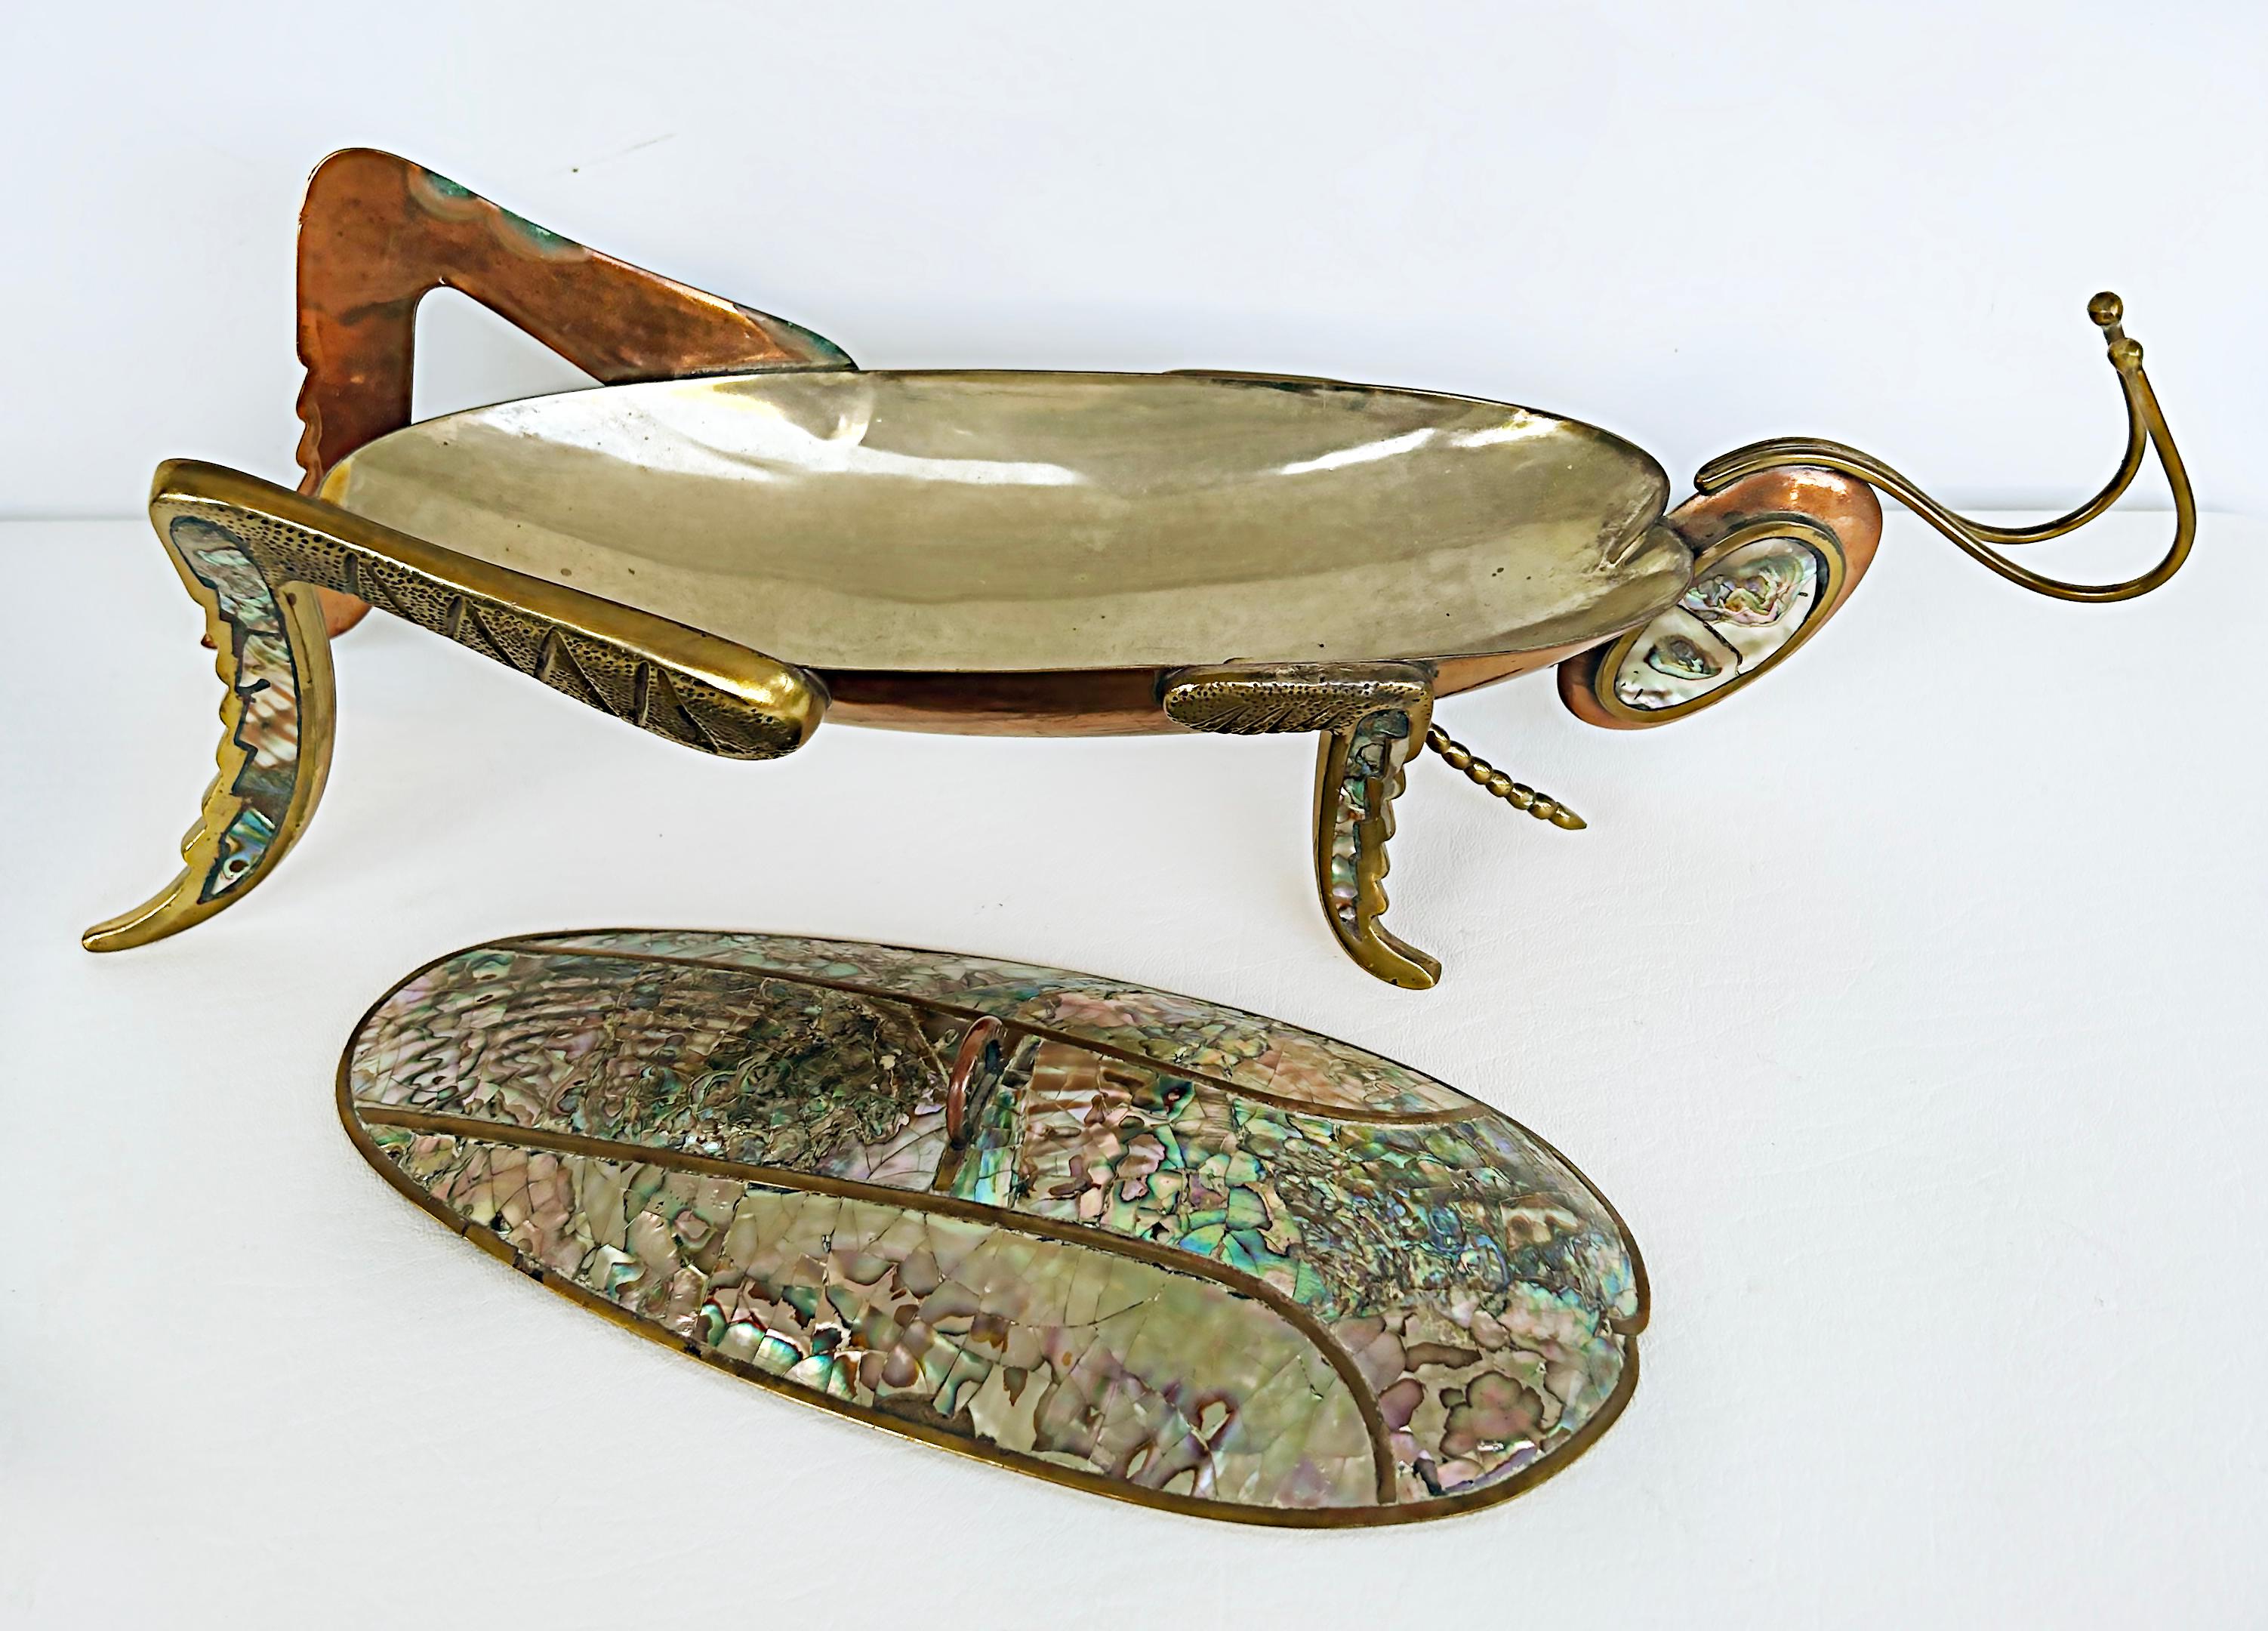 60s Mexican Mid-Century Abalone Shell Grasshopper Tray with Lid, Mixed Metals For Sale 3